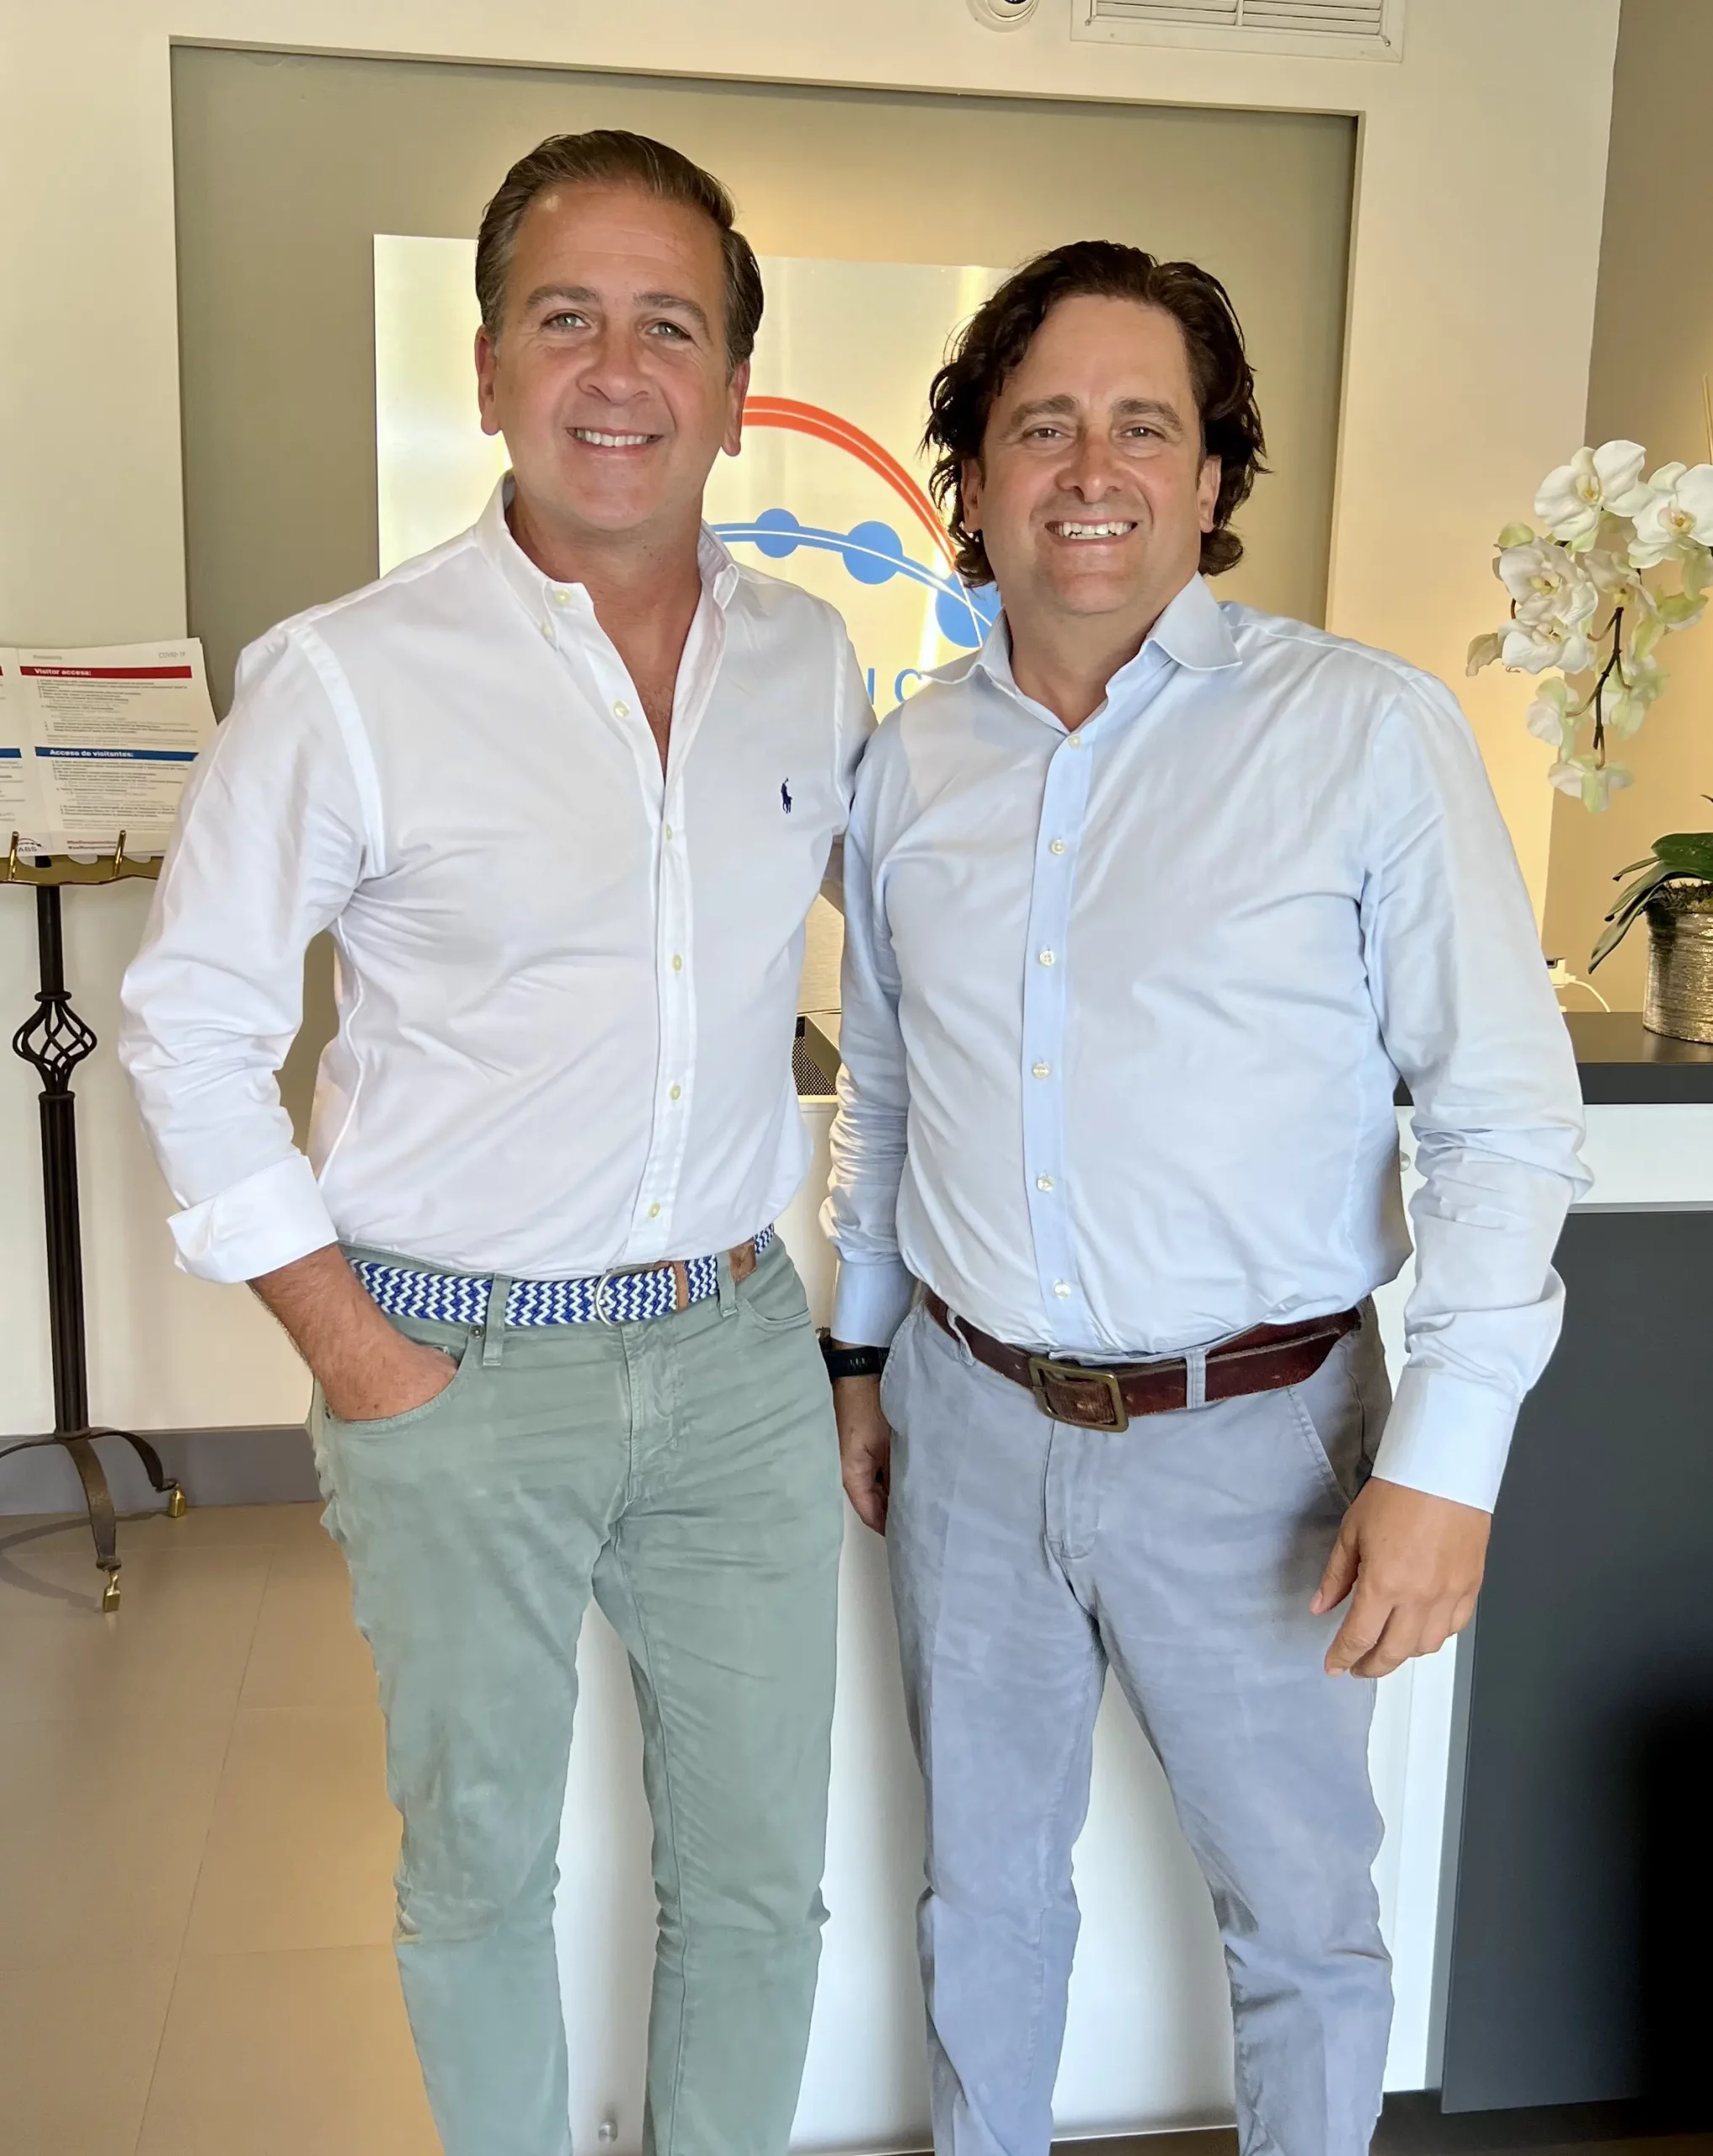 Alejandro Pardiñas, ABS Wind CEO, with Otto Díaz, new National Sales Director of ABS Wind USA